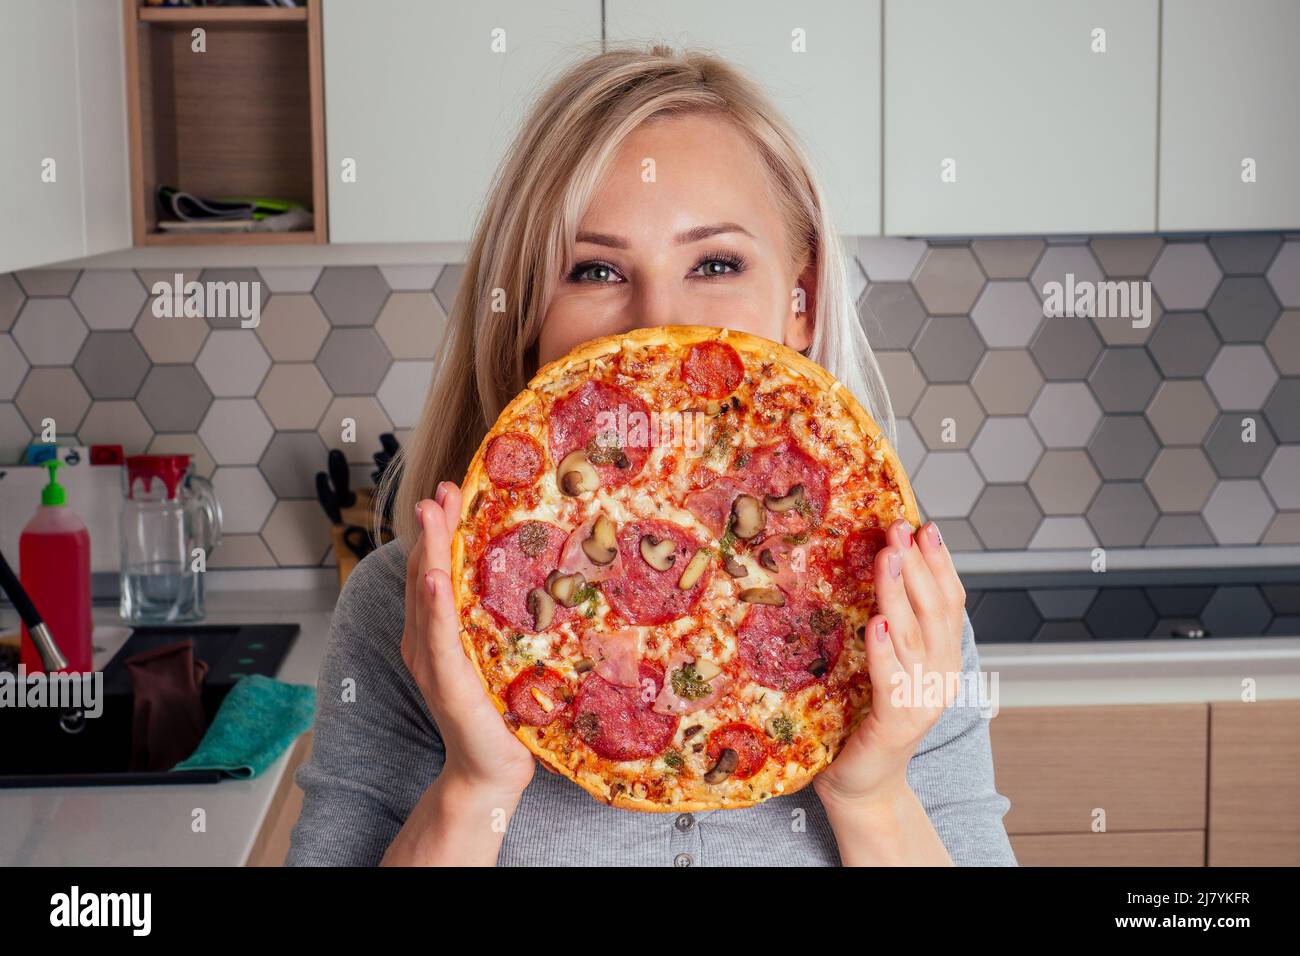 woman openung ovens and cut pizza with tomatoes, olives, mushrooms and cheese sausage Stock Photo